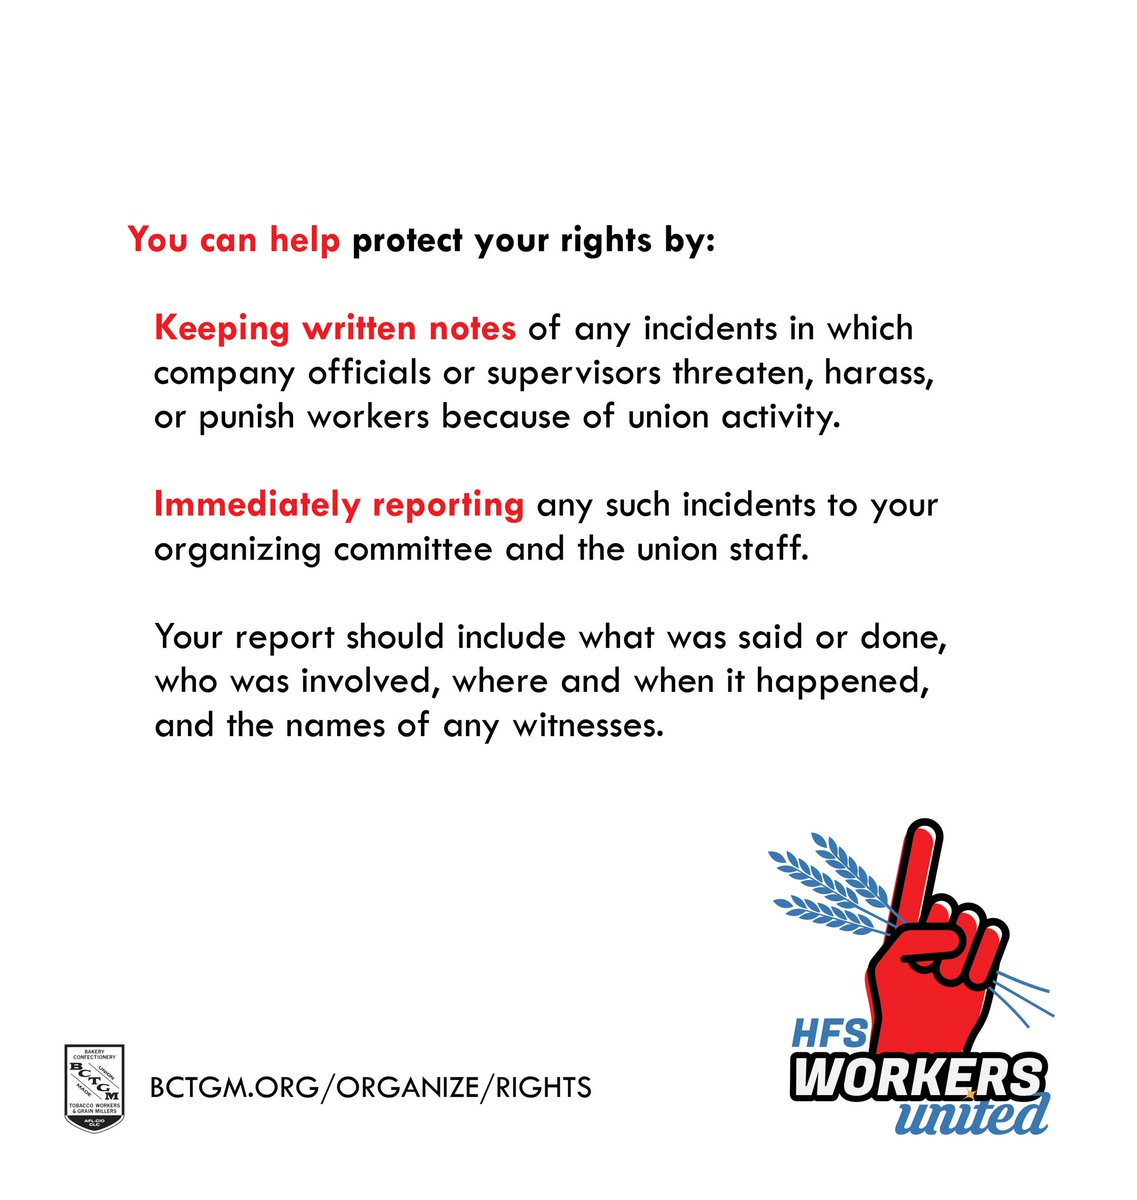 The Union election for Hearthside workers in London, Ky. is NEXT WEEK (May 7-8) This can be a contentious time for workers so we urge you to keep YOUR RIGHTS handy. Contact BCTGM organizers if you feel they are being violated! #hfsworkersunited #unionyes #bctgmpower